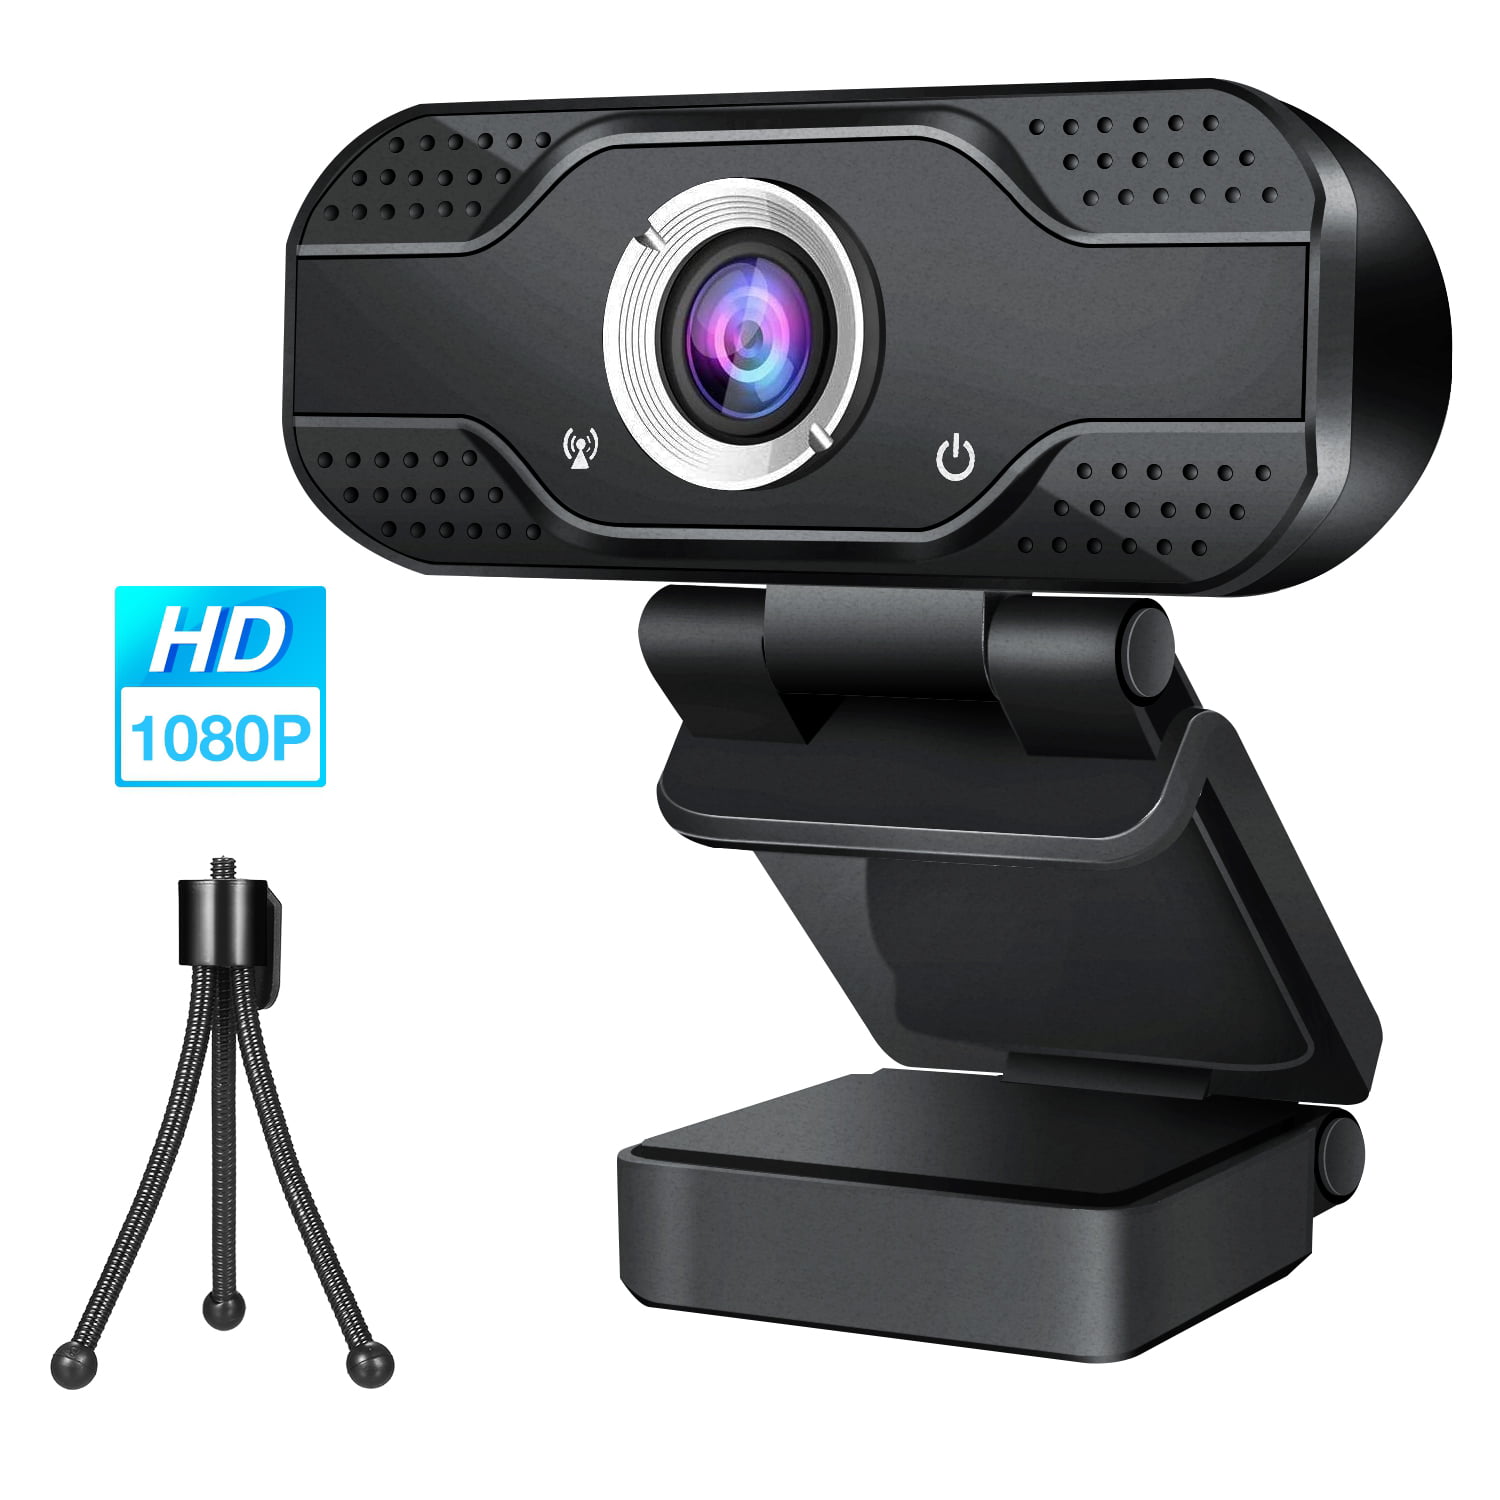 1280 720 P HD Wired Connection Webcam with Microphone Streaming Computer Web Camera for Cam for Video Calling Conferencing Gaming Laptop Desktop Computer Camera Video Exam Class